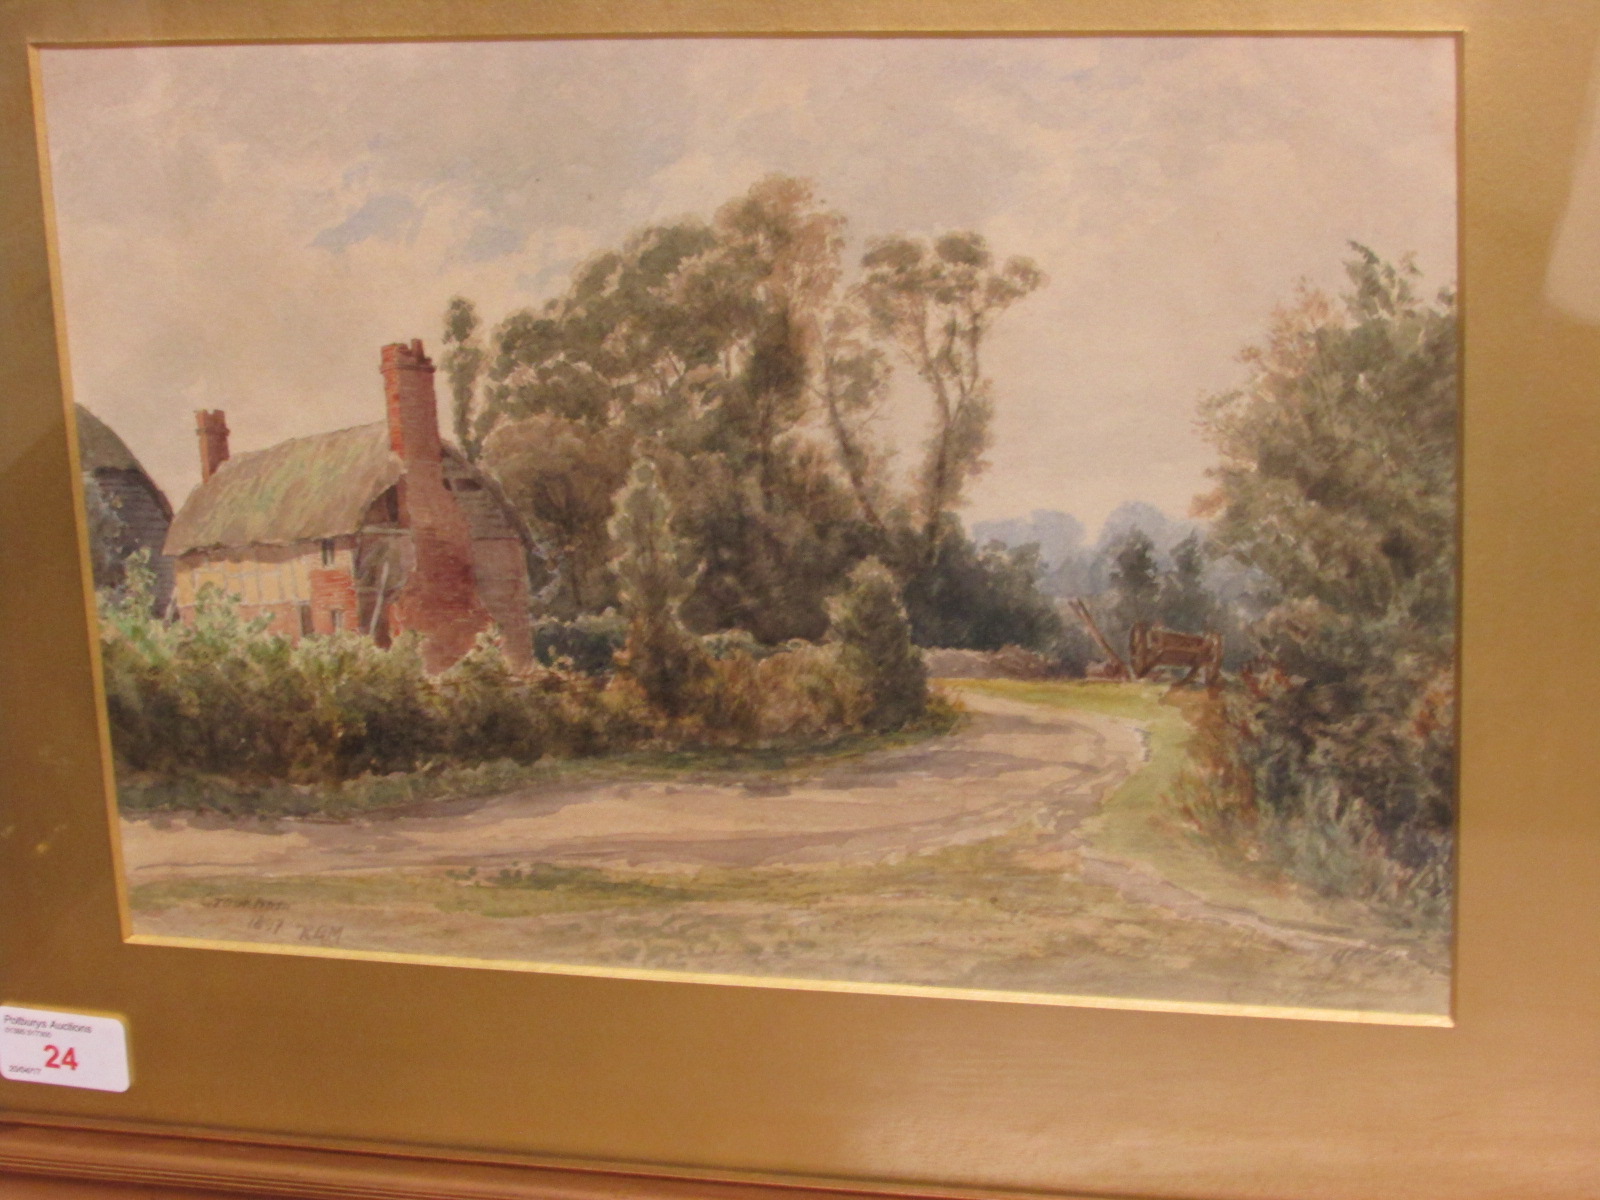 Crookham, watercolour, titled lower left, initialled RBM and dated 1897, (23cm x 34cm), F&G